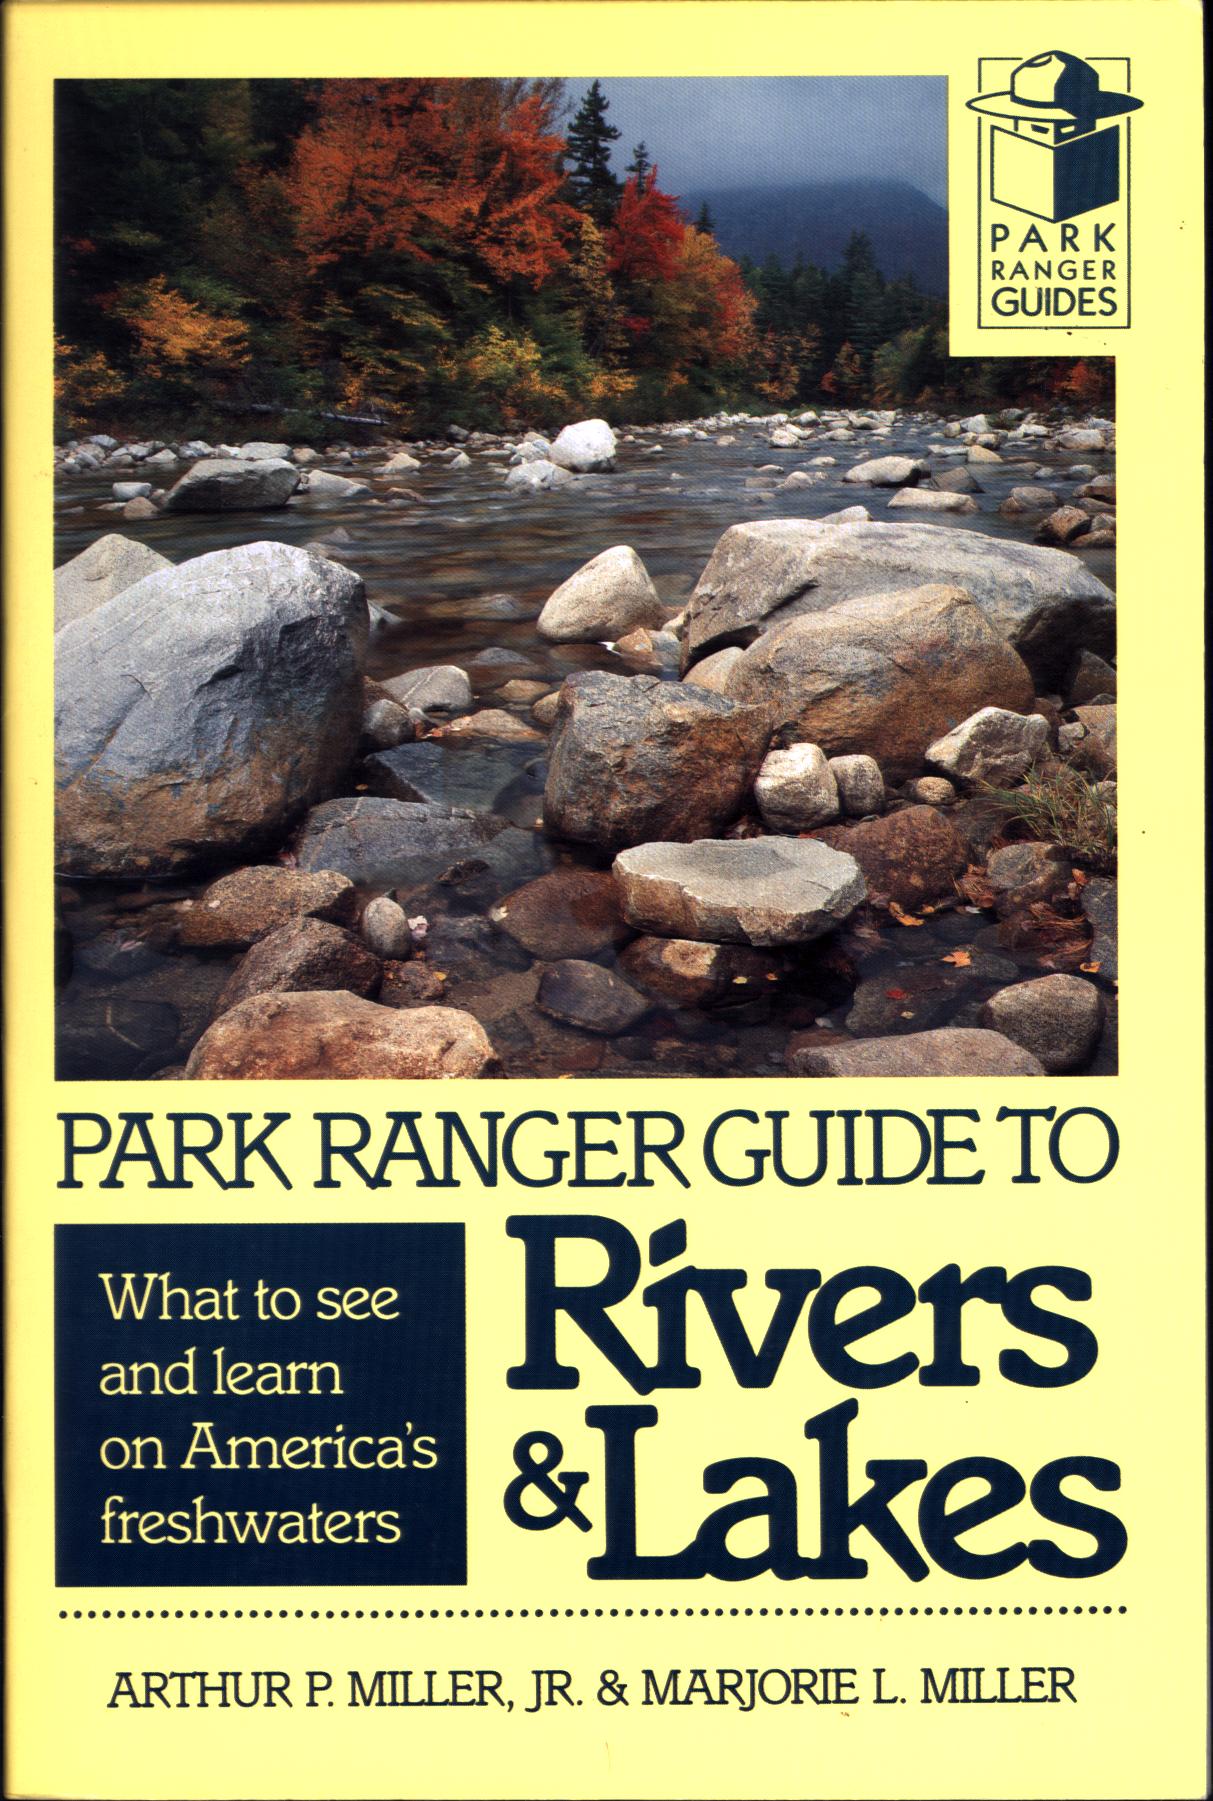 PARK RANGER GUIDE TO RIVERS & LAKES.